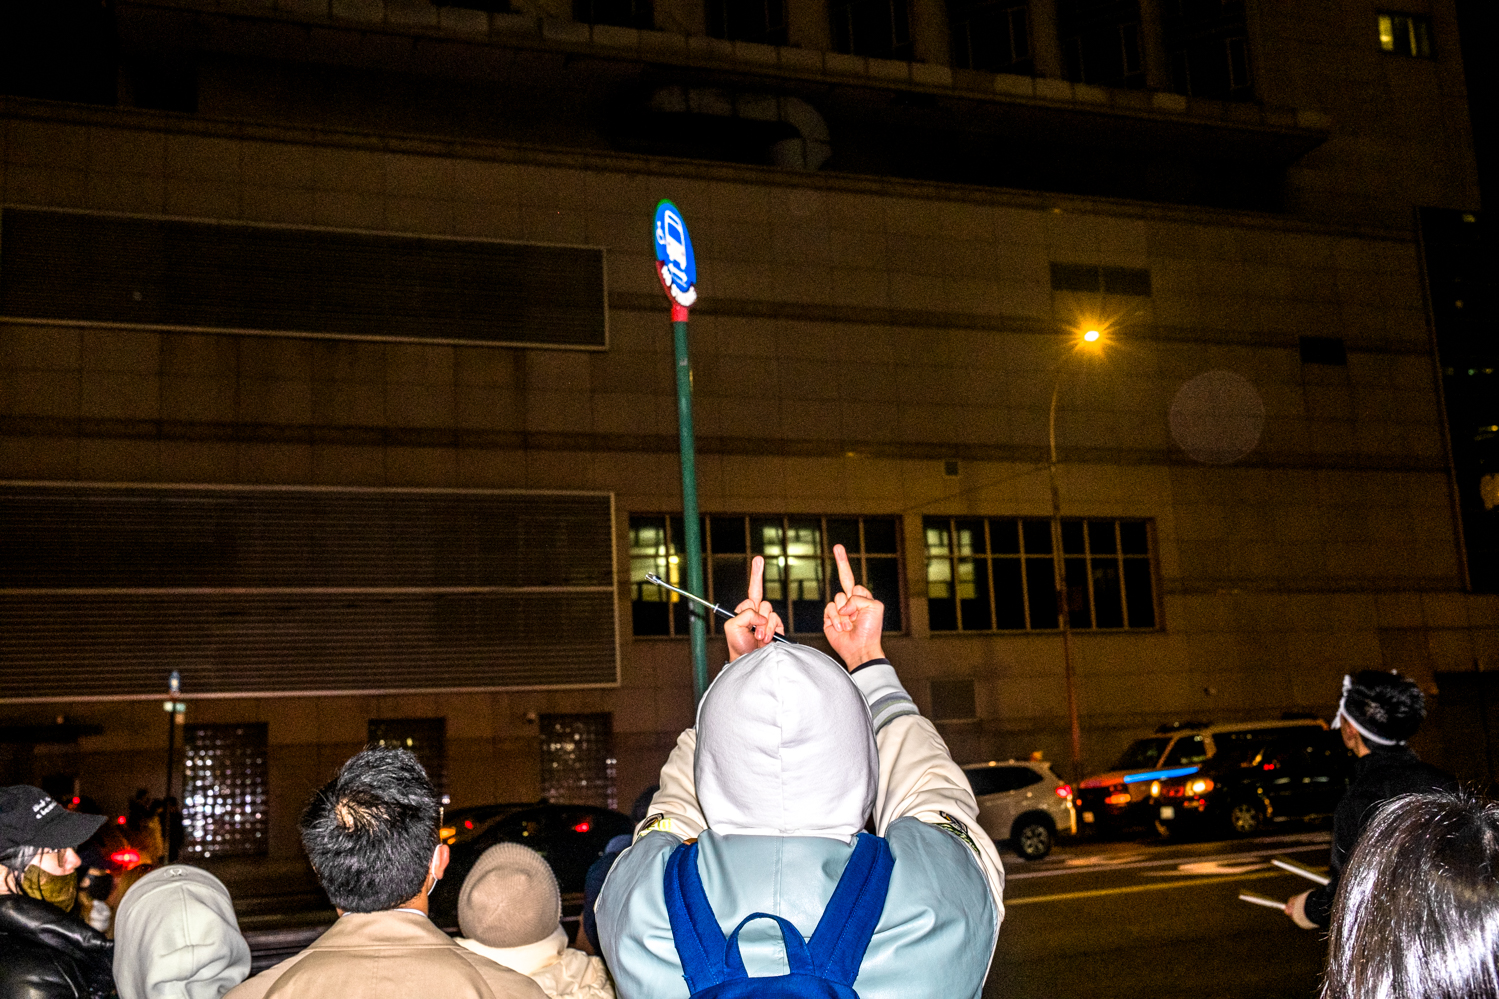 A protester wearing a hoodie shows both of their middle fingers to the Chinese Consulate General.